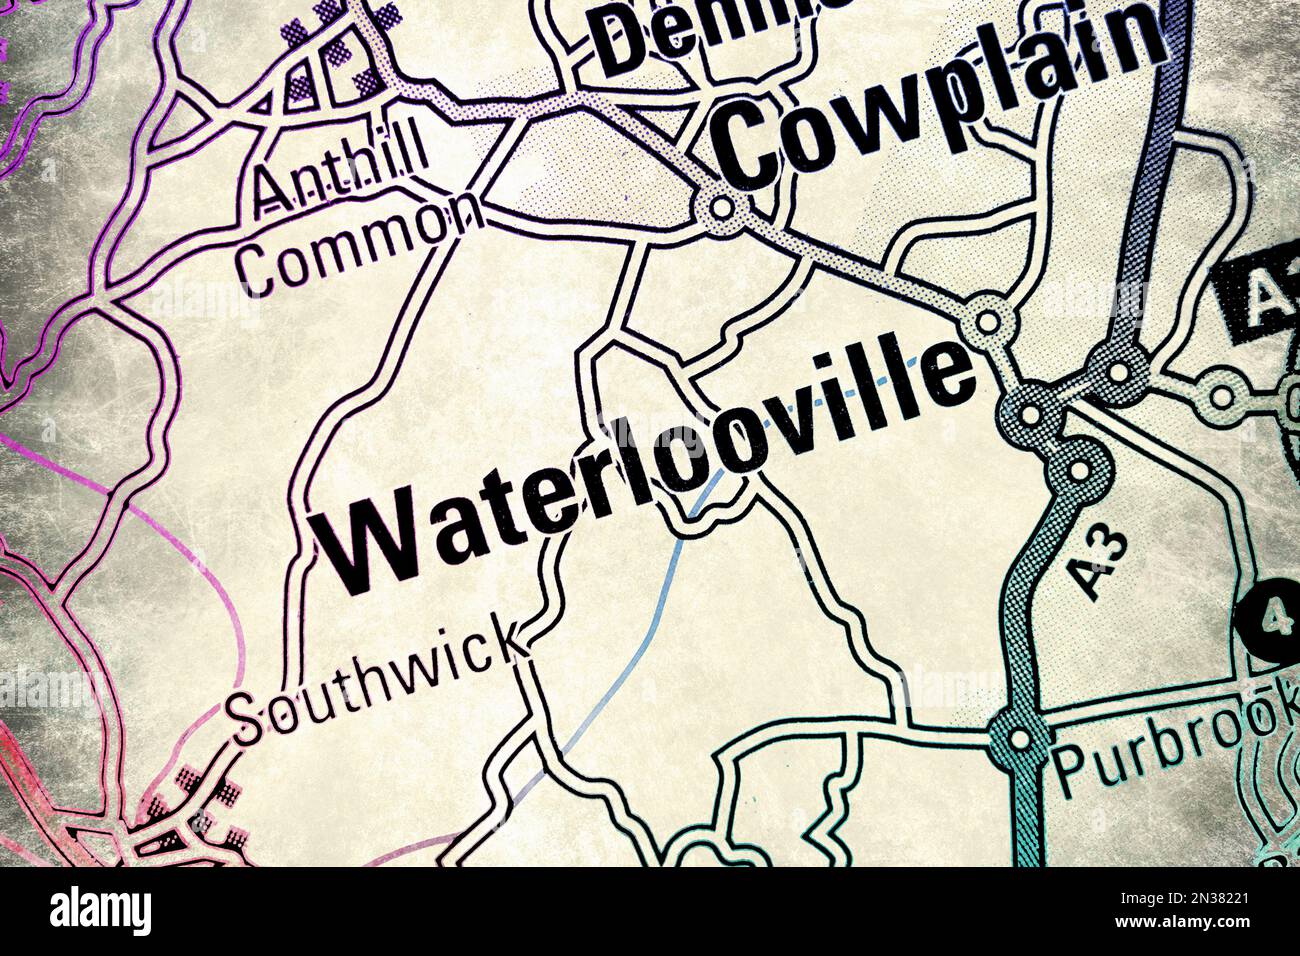 Waterlooville, Hampshire, United Kingdom atlas map town name - watercolour effect Stock Photo